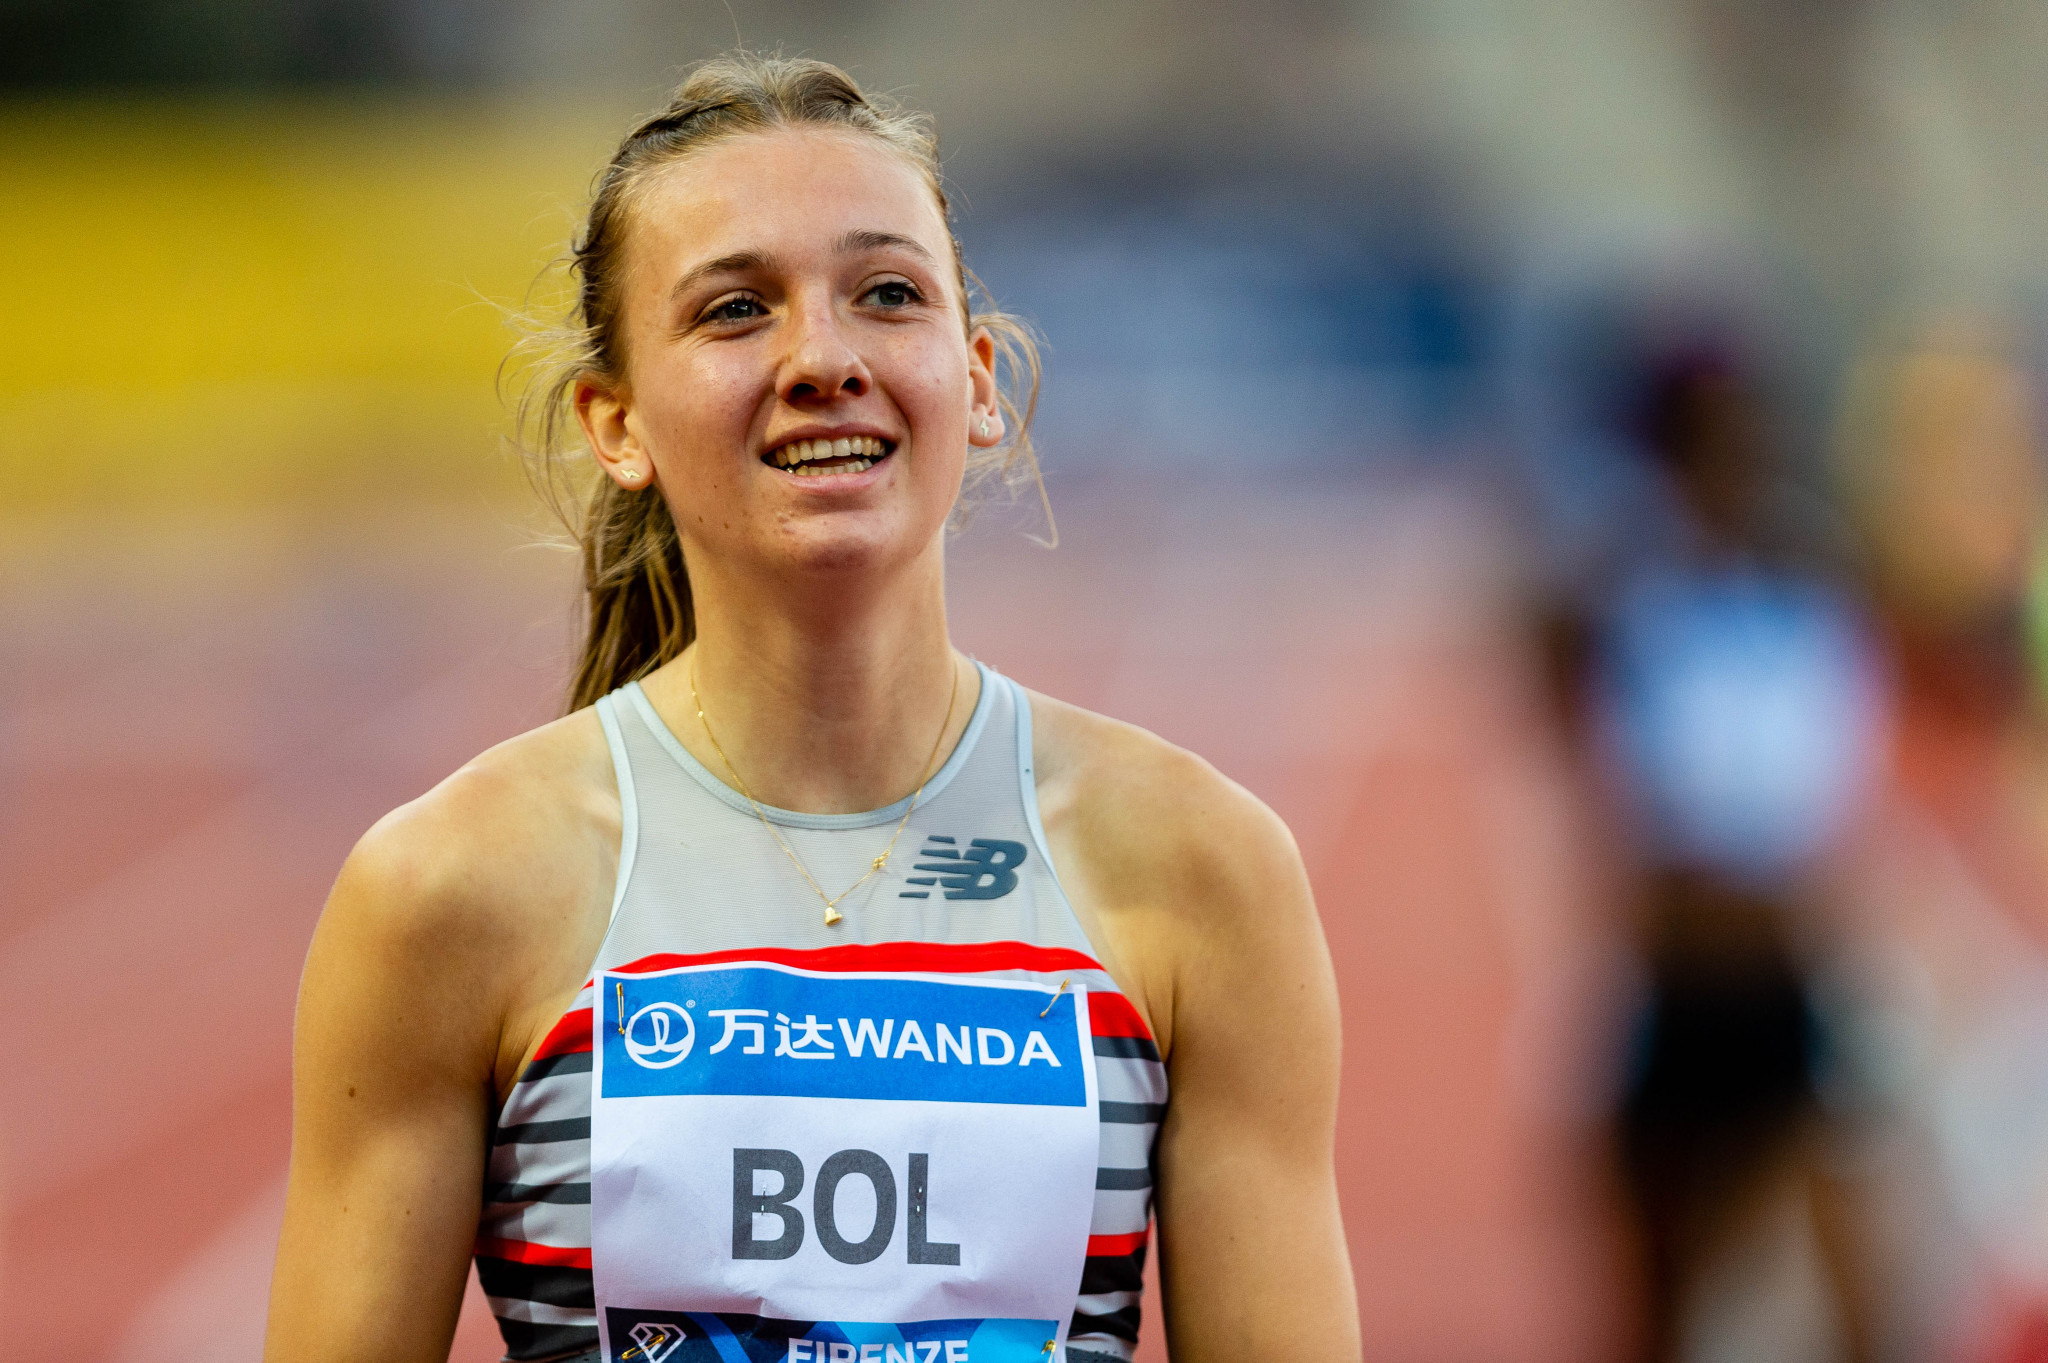 Dutch 400m hurdler Femke Bol moved to fourth in the all-time list with her victory at the Diamond League meeting in Stockholm ©Getty Images